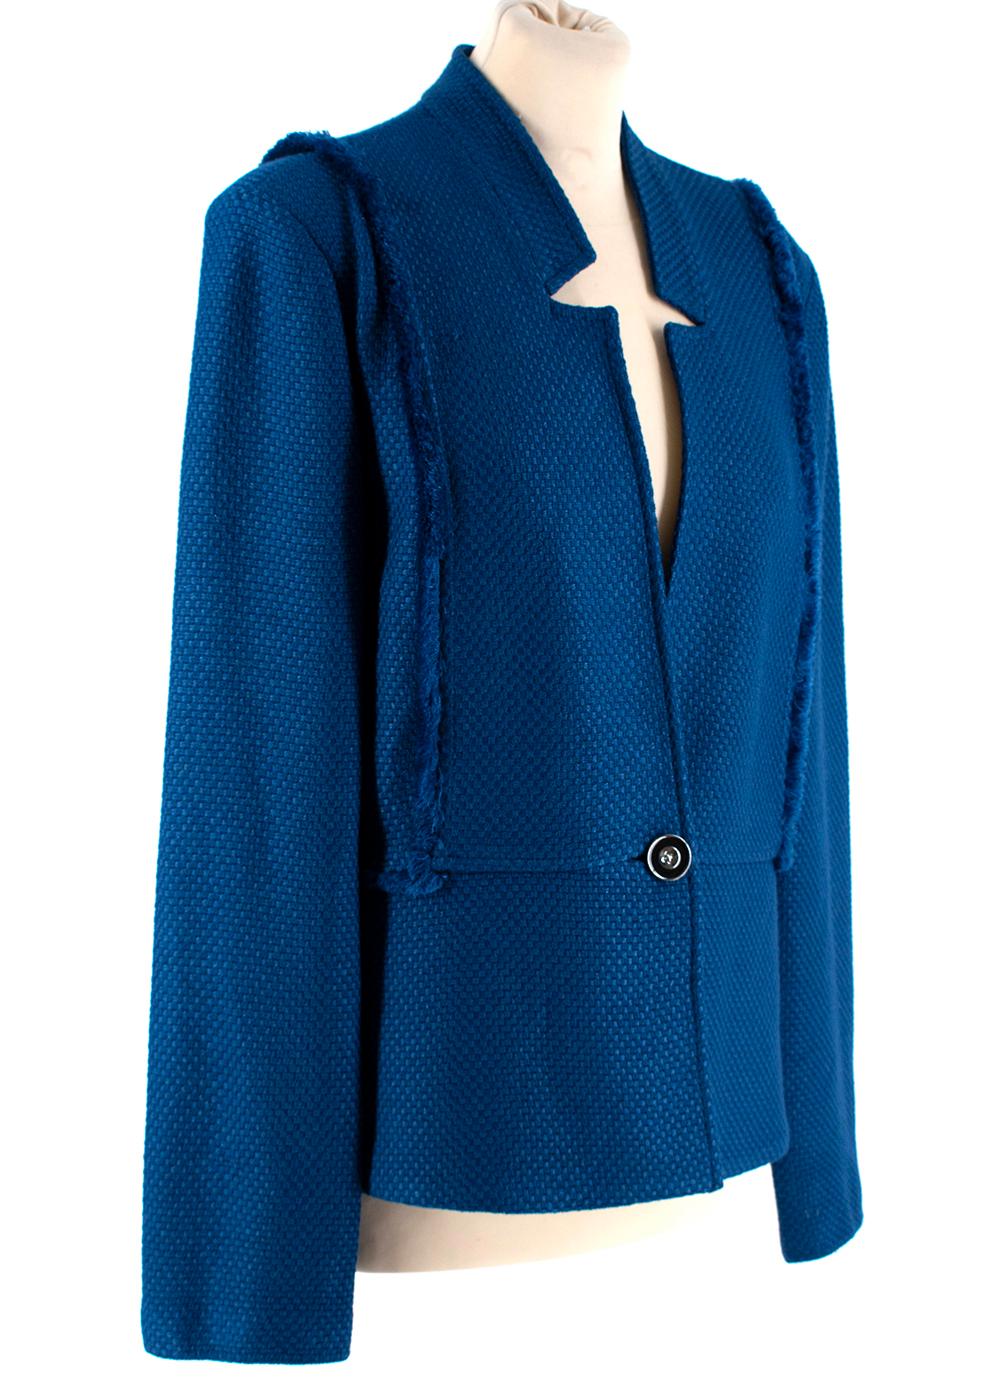 St John Blue Tweed Blazer

- Blue tweed blazer
- Classic fit
- Tweed details at the front and back 
- Contains shoulder bags
- Button fastening at front 

Materials:
50 % rayon 50% wool; facing: 92% silk,8% spandex 
Dry cleaning only; Made in